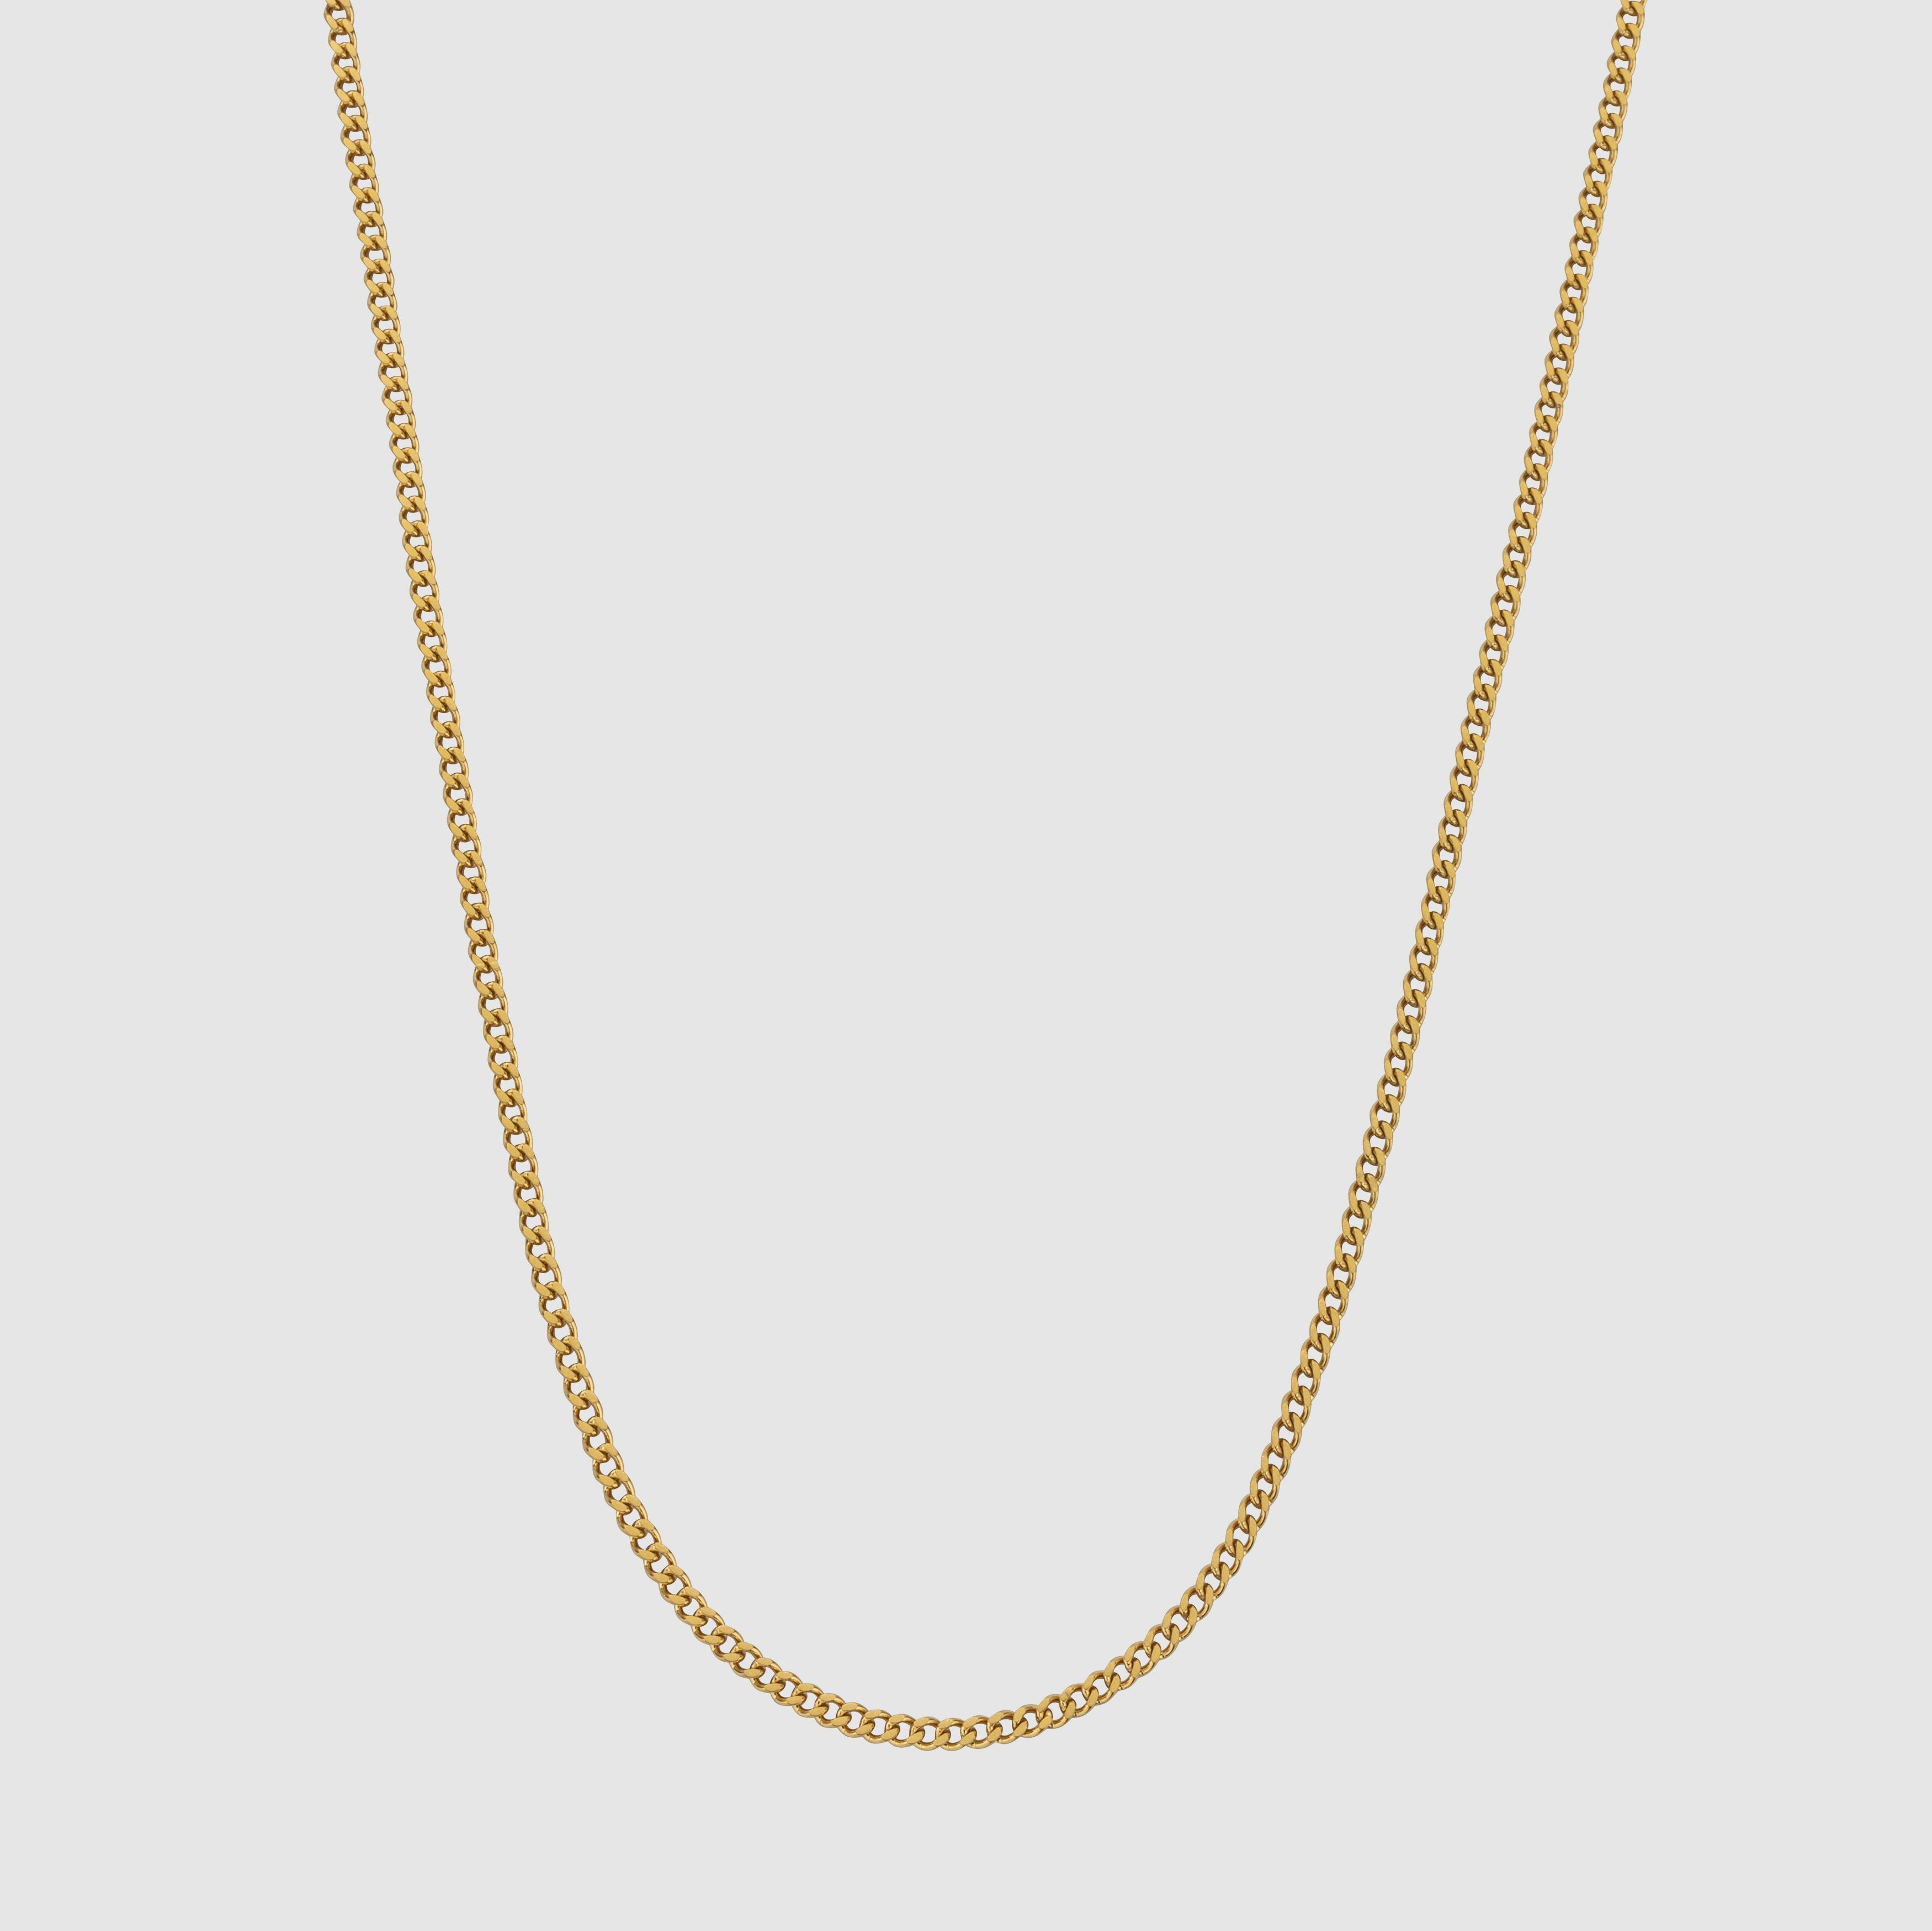 Connell Kette (Gold) 2mm